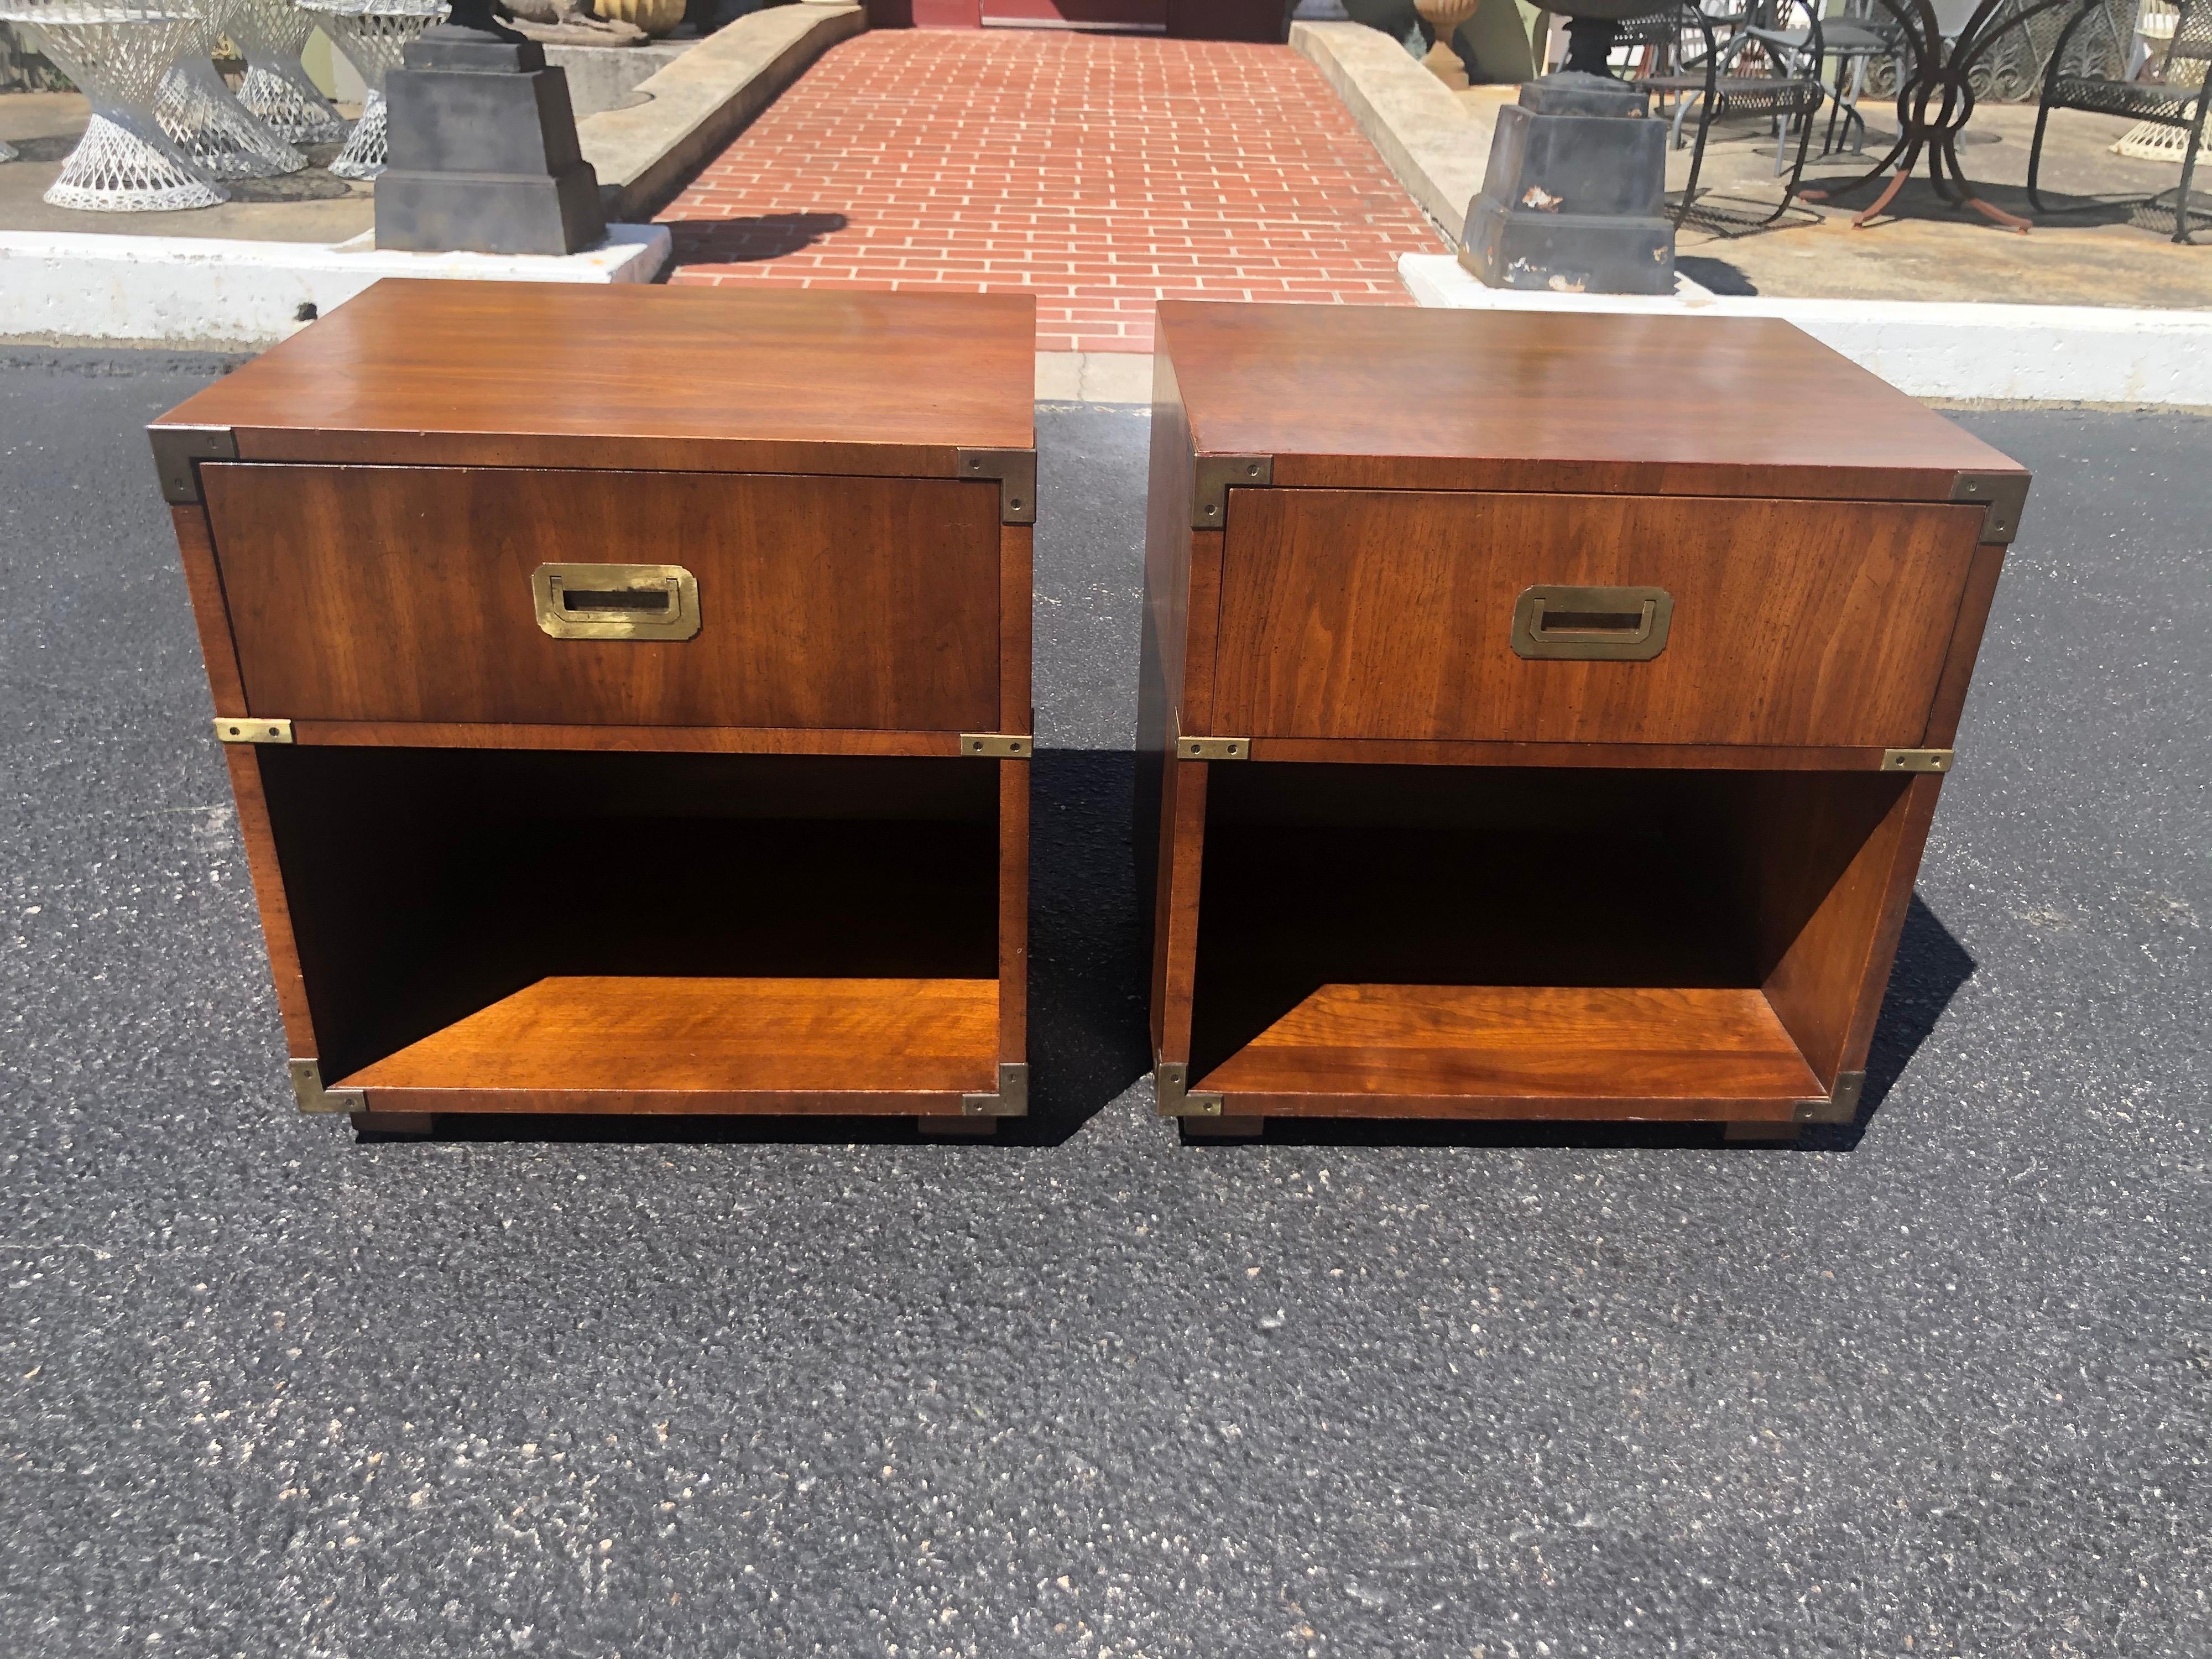 Pair of Henredon Campaign nightstands in walnut. Classic design with nice brass hardware, Single top drawer with open cabinet shelf base. Hard to find these beauties.